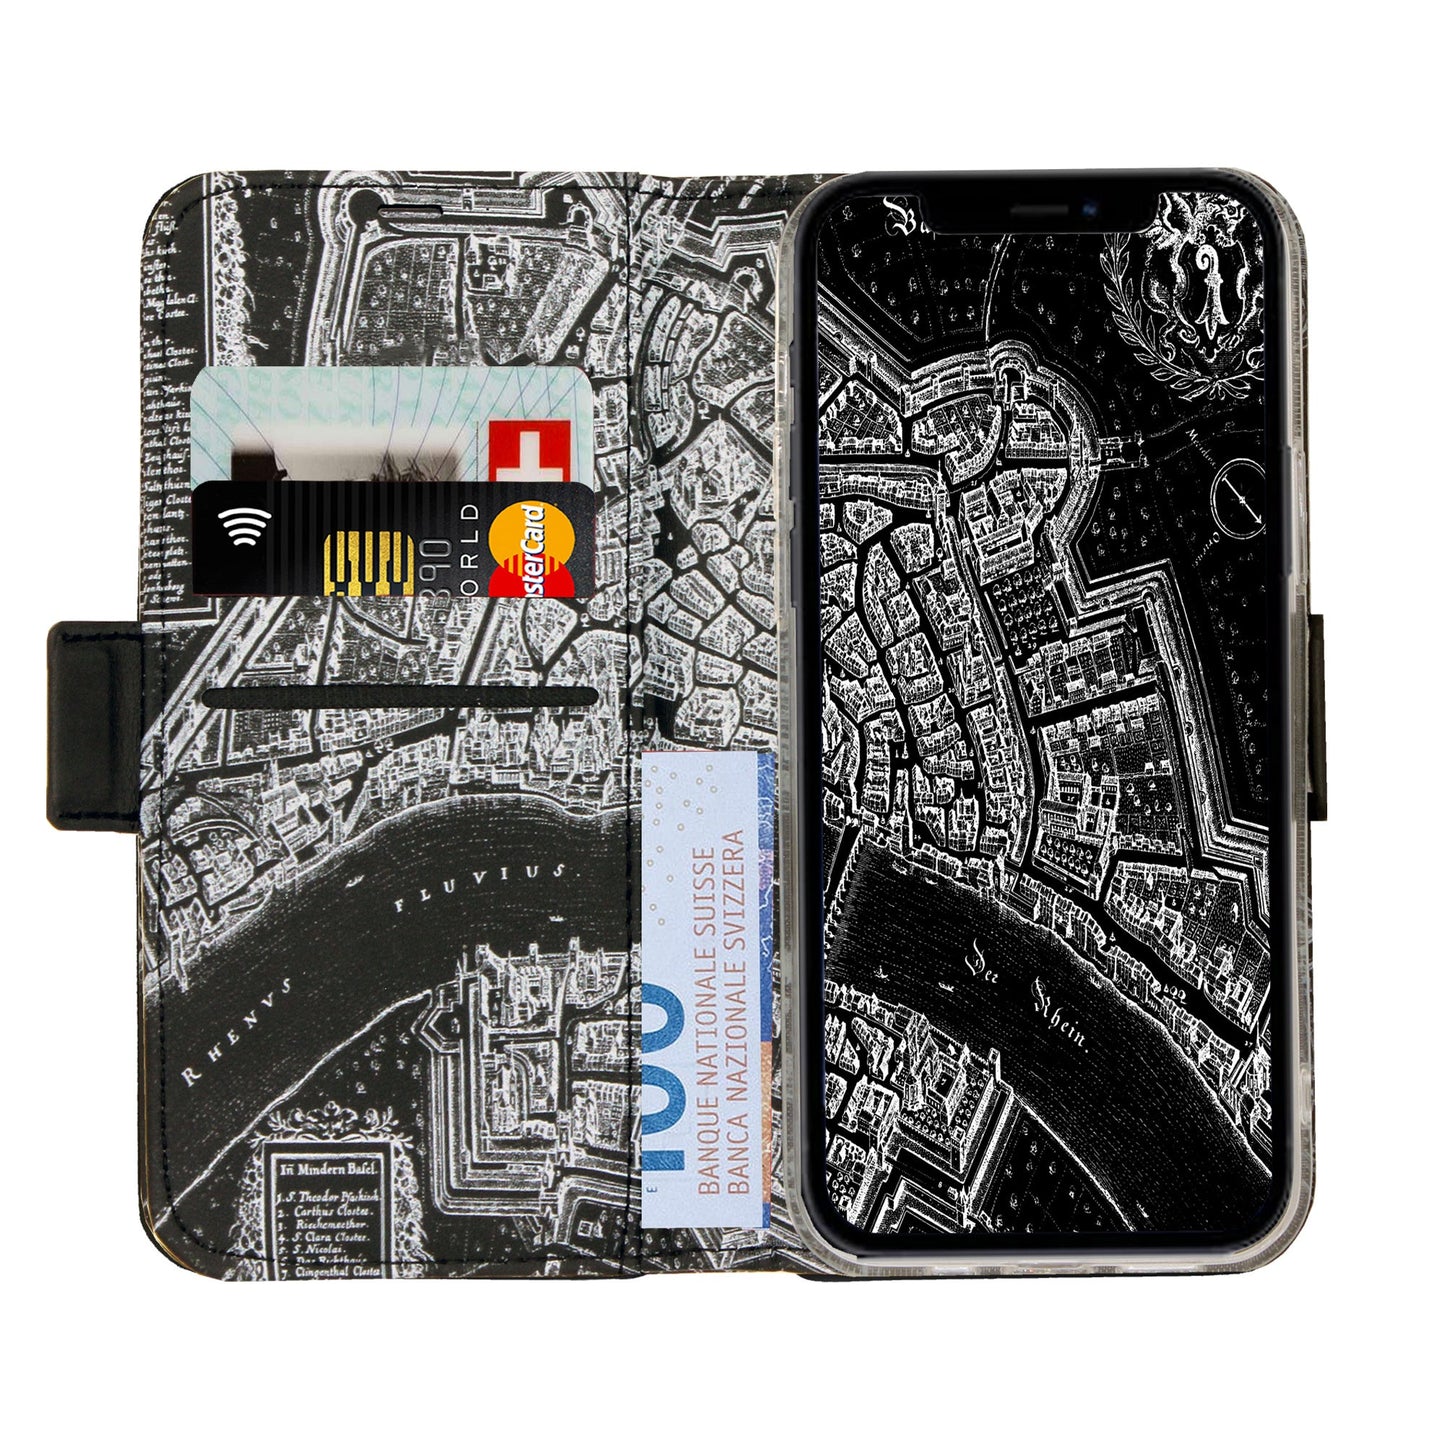 Basel Merian Negative Victor Case for iPhone 11 Pro